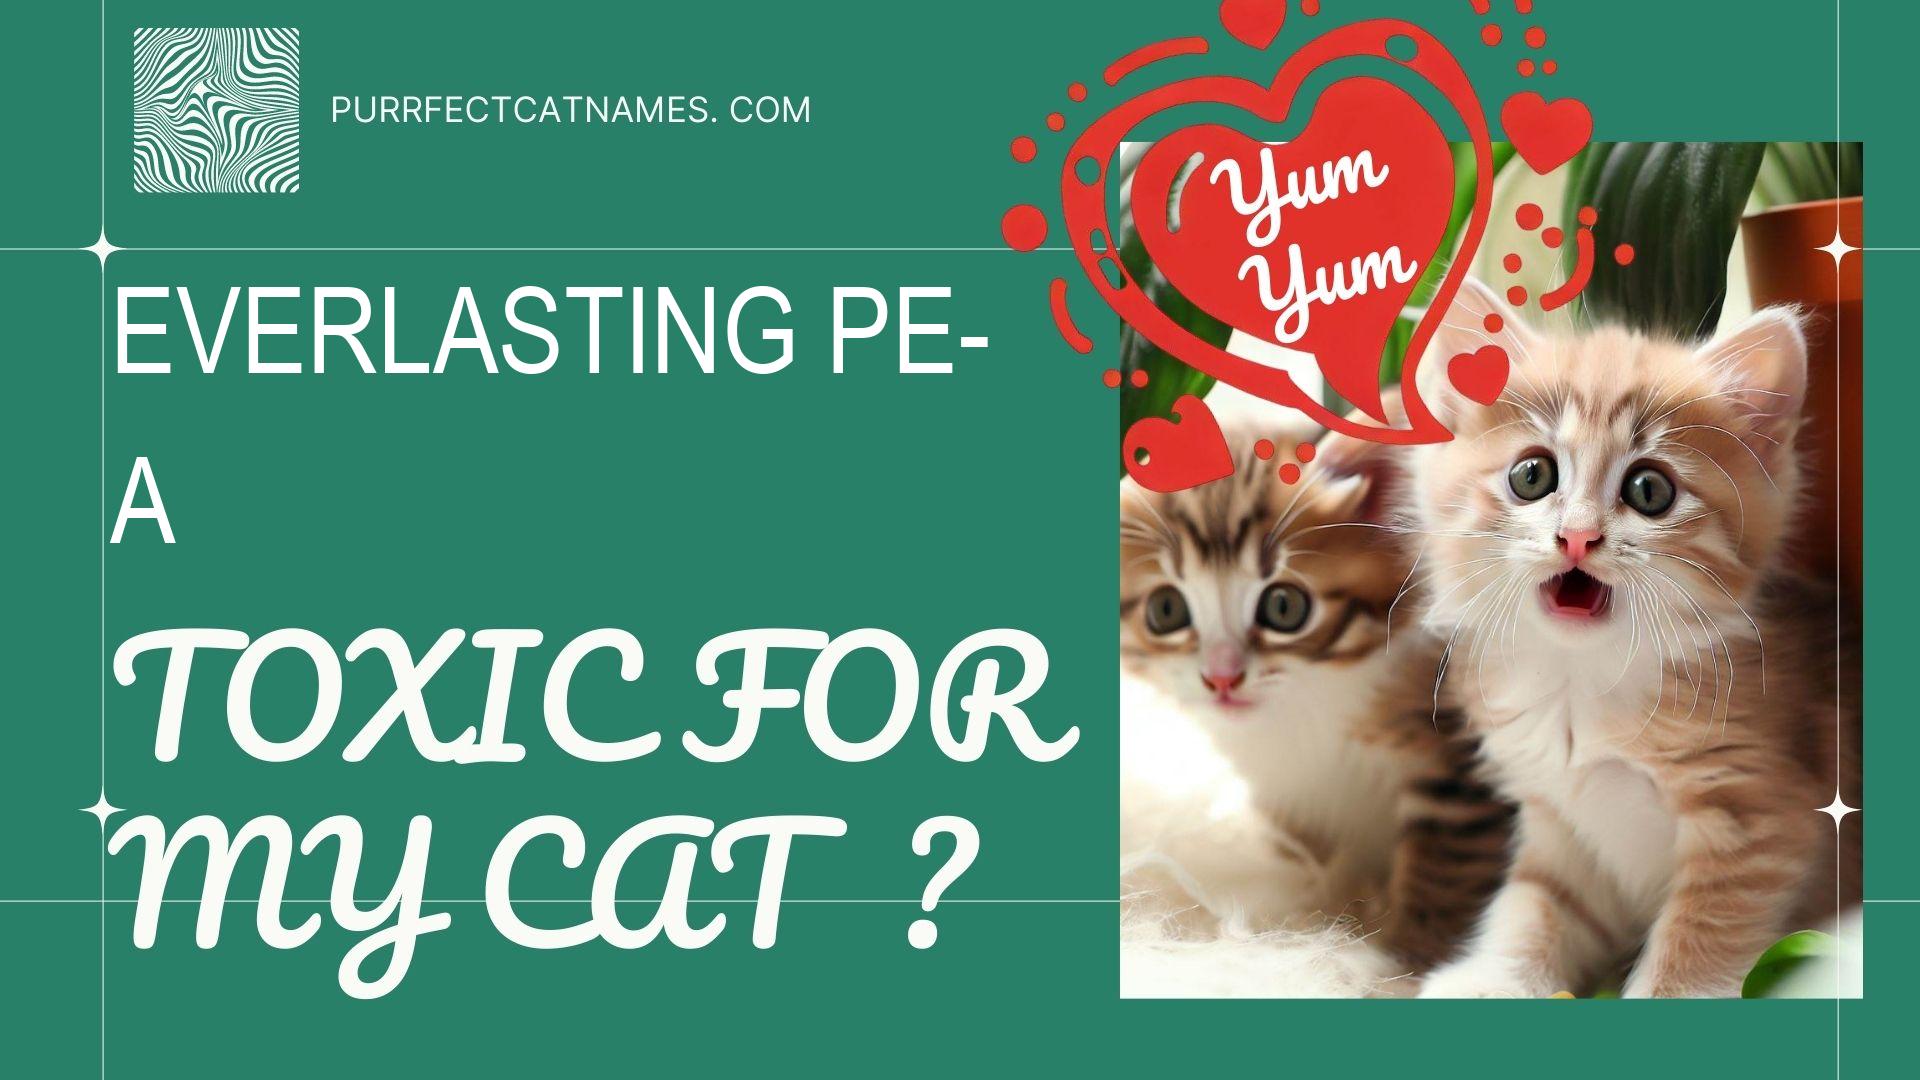 IsEverlasting Pea plant toxic for your cat